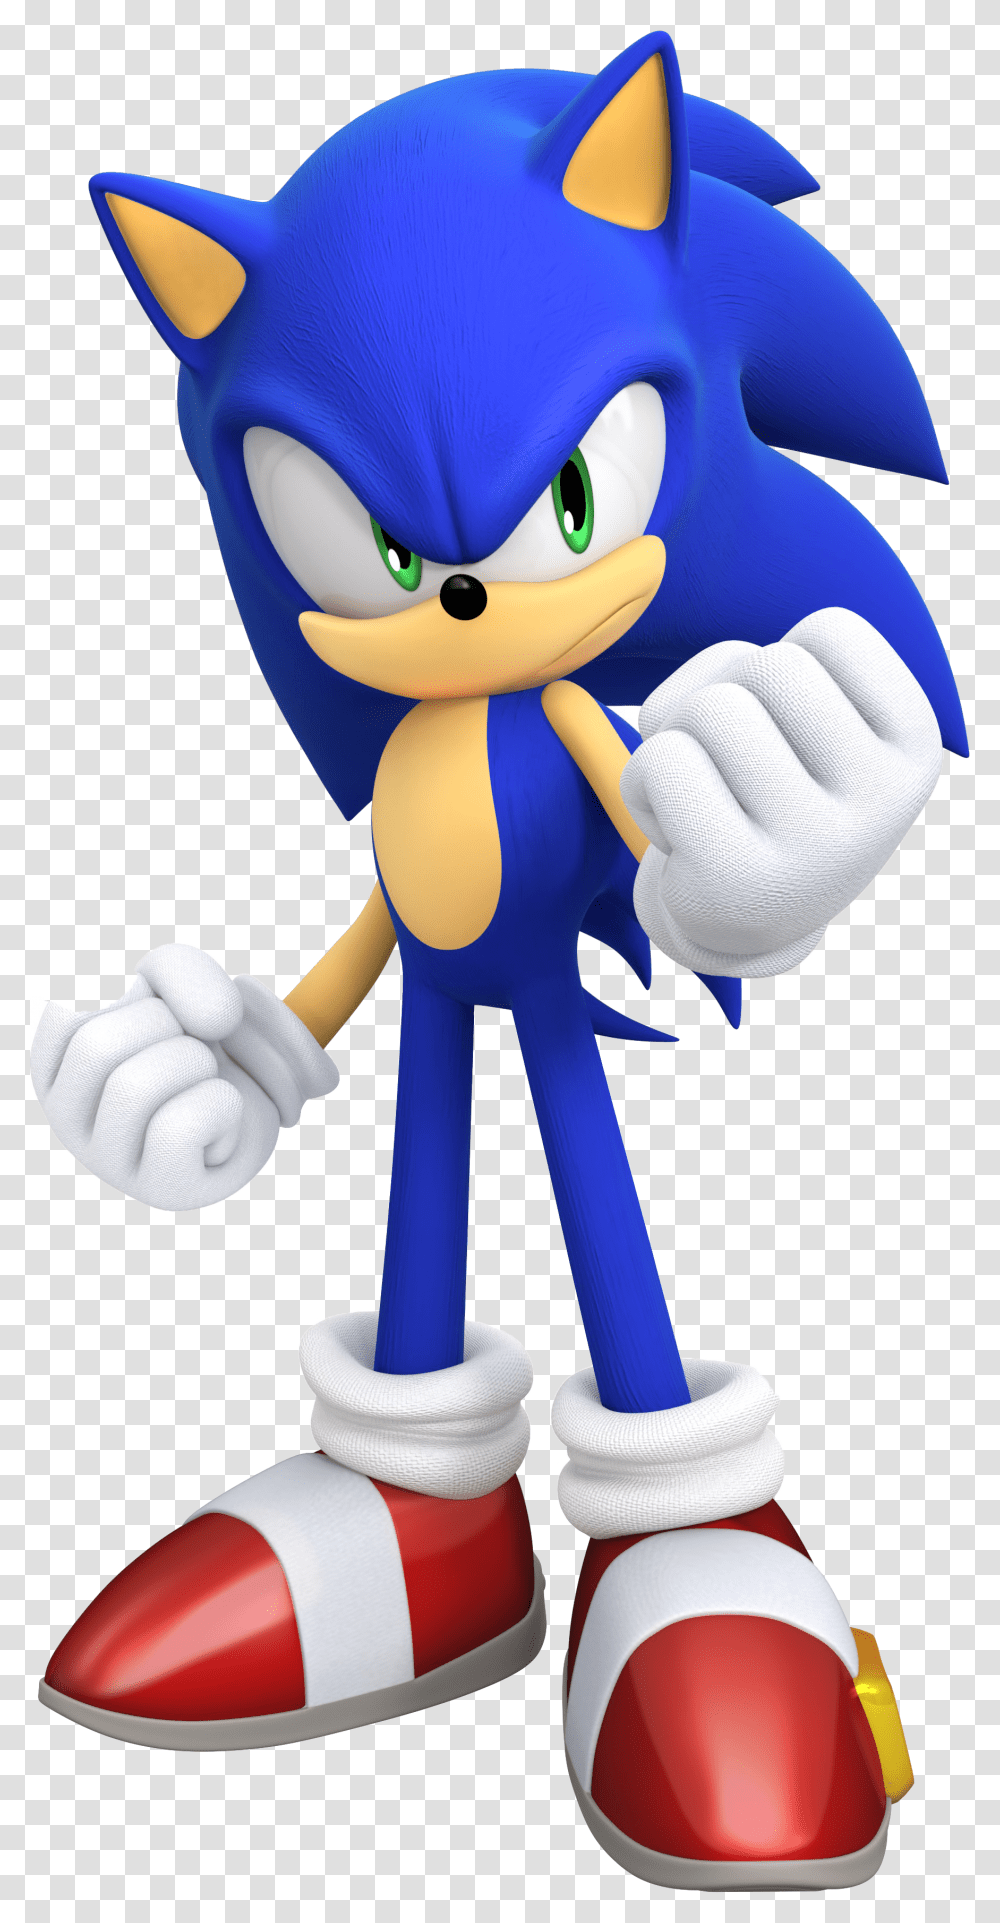 Sonic The Hedgehog Image Sonic The Hedgehog, Toy, Mascot, Plush, Super Mario Transparent Png